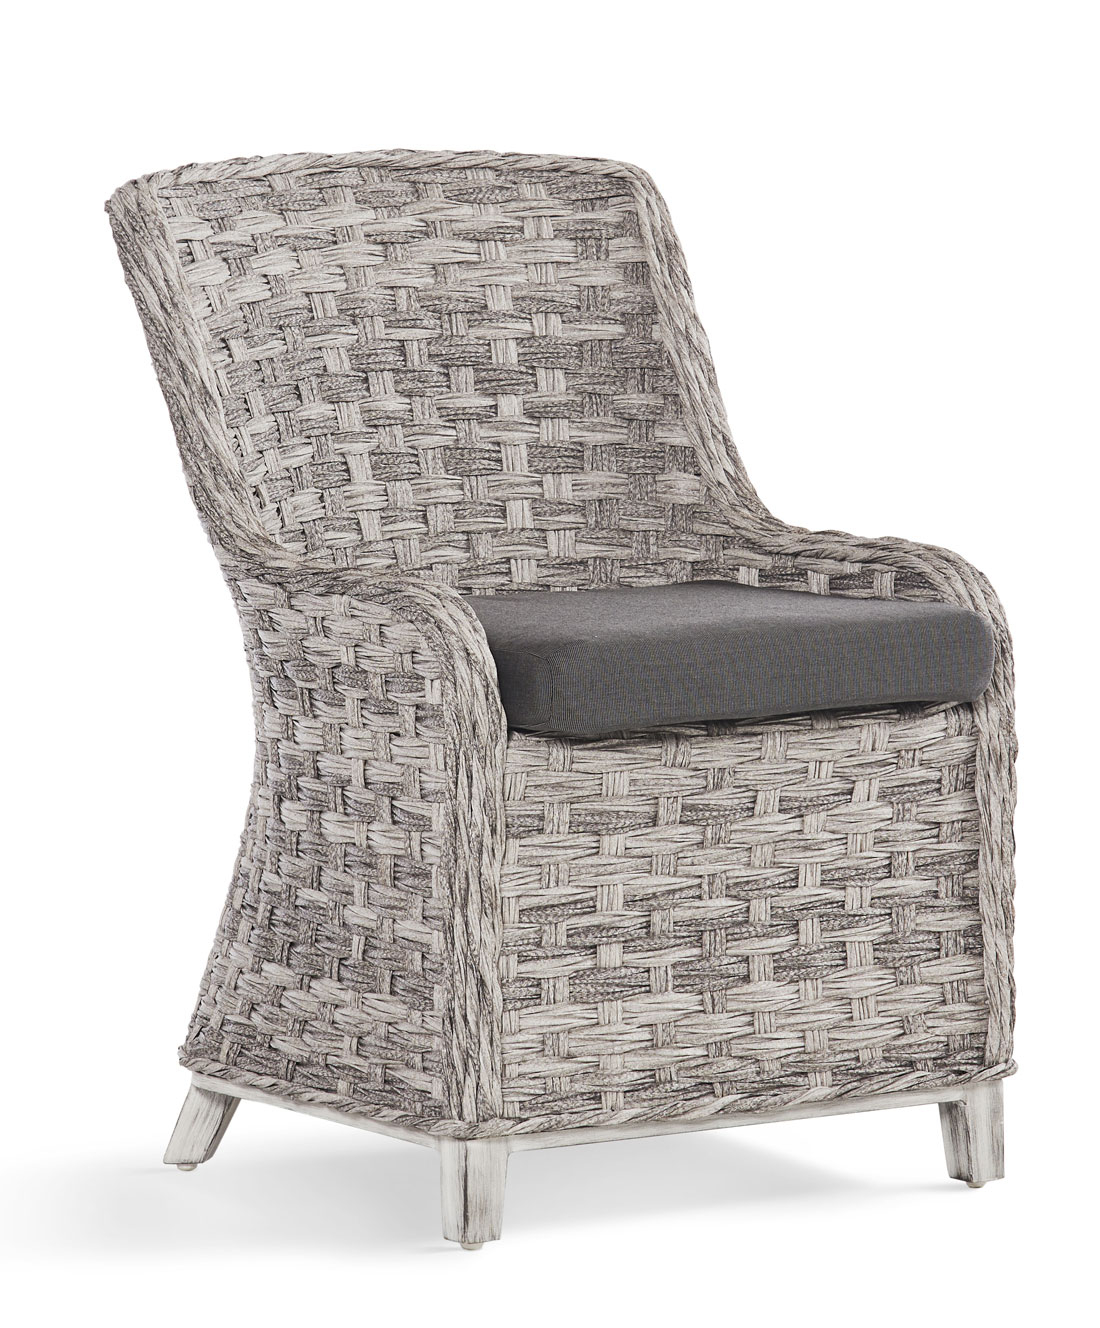 Canyon Lake Resin Wicker Dining Side Chair 